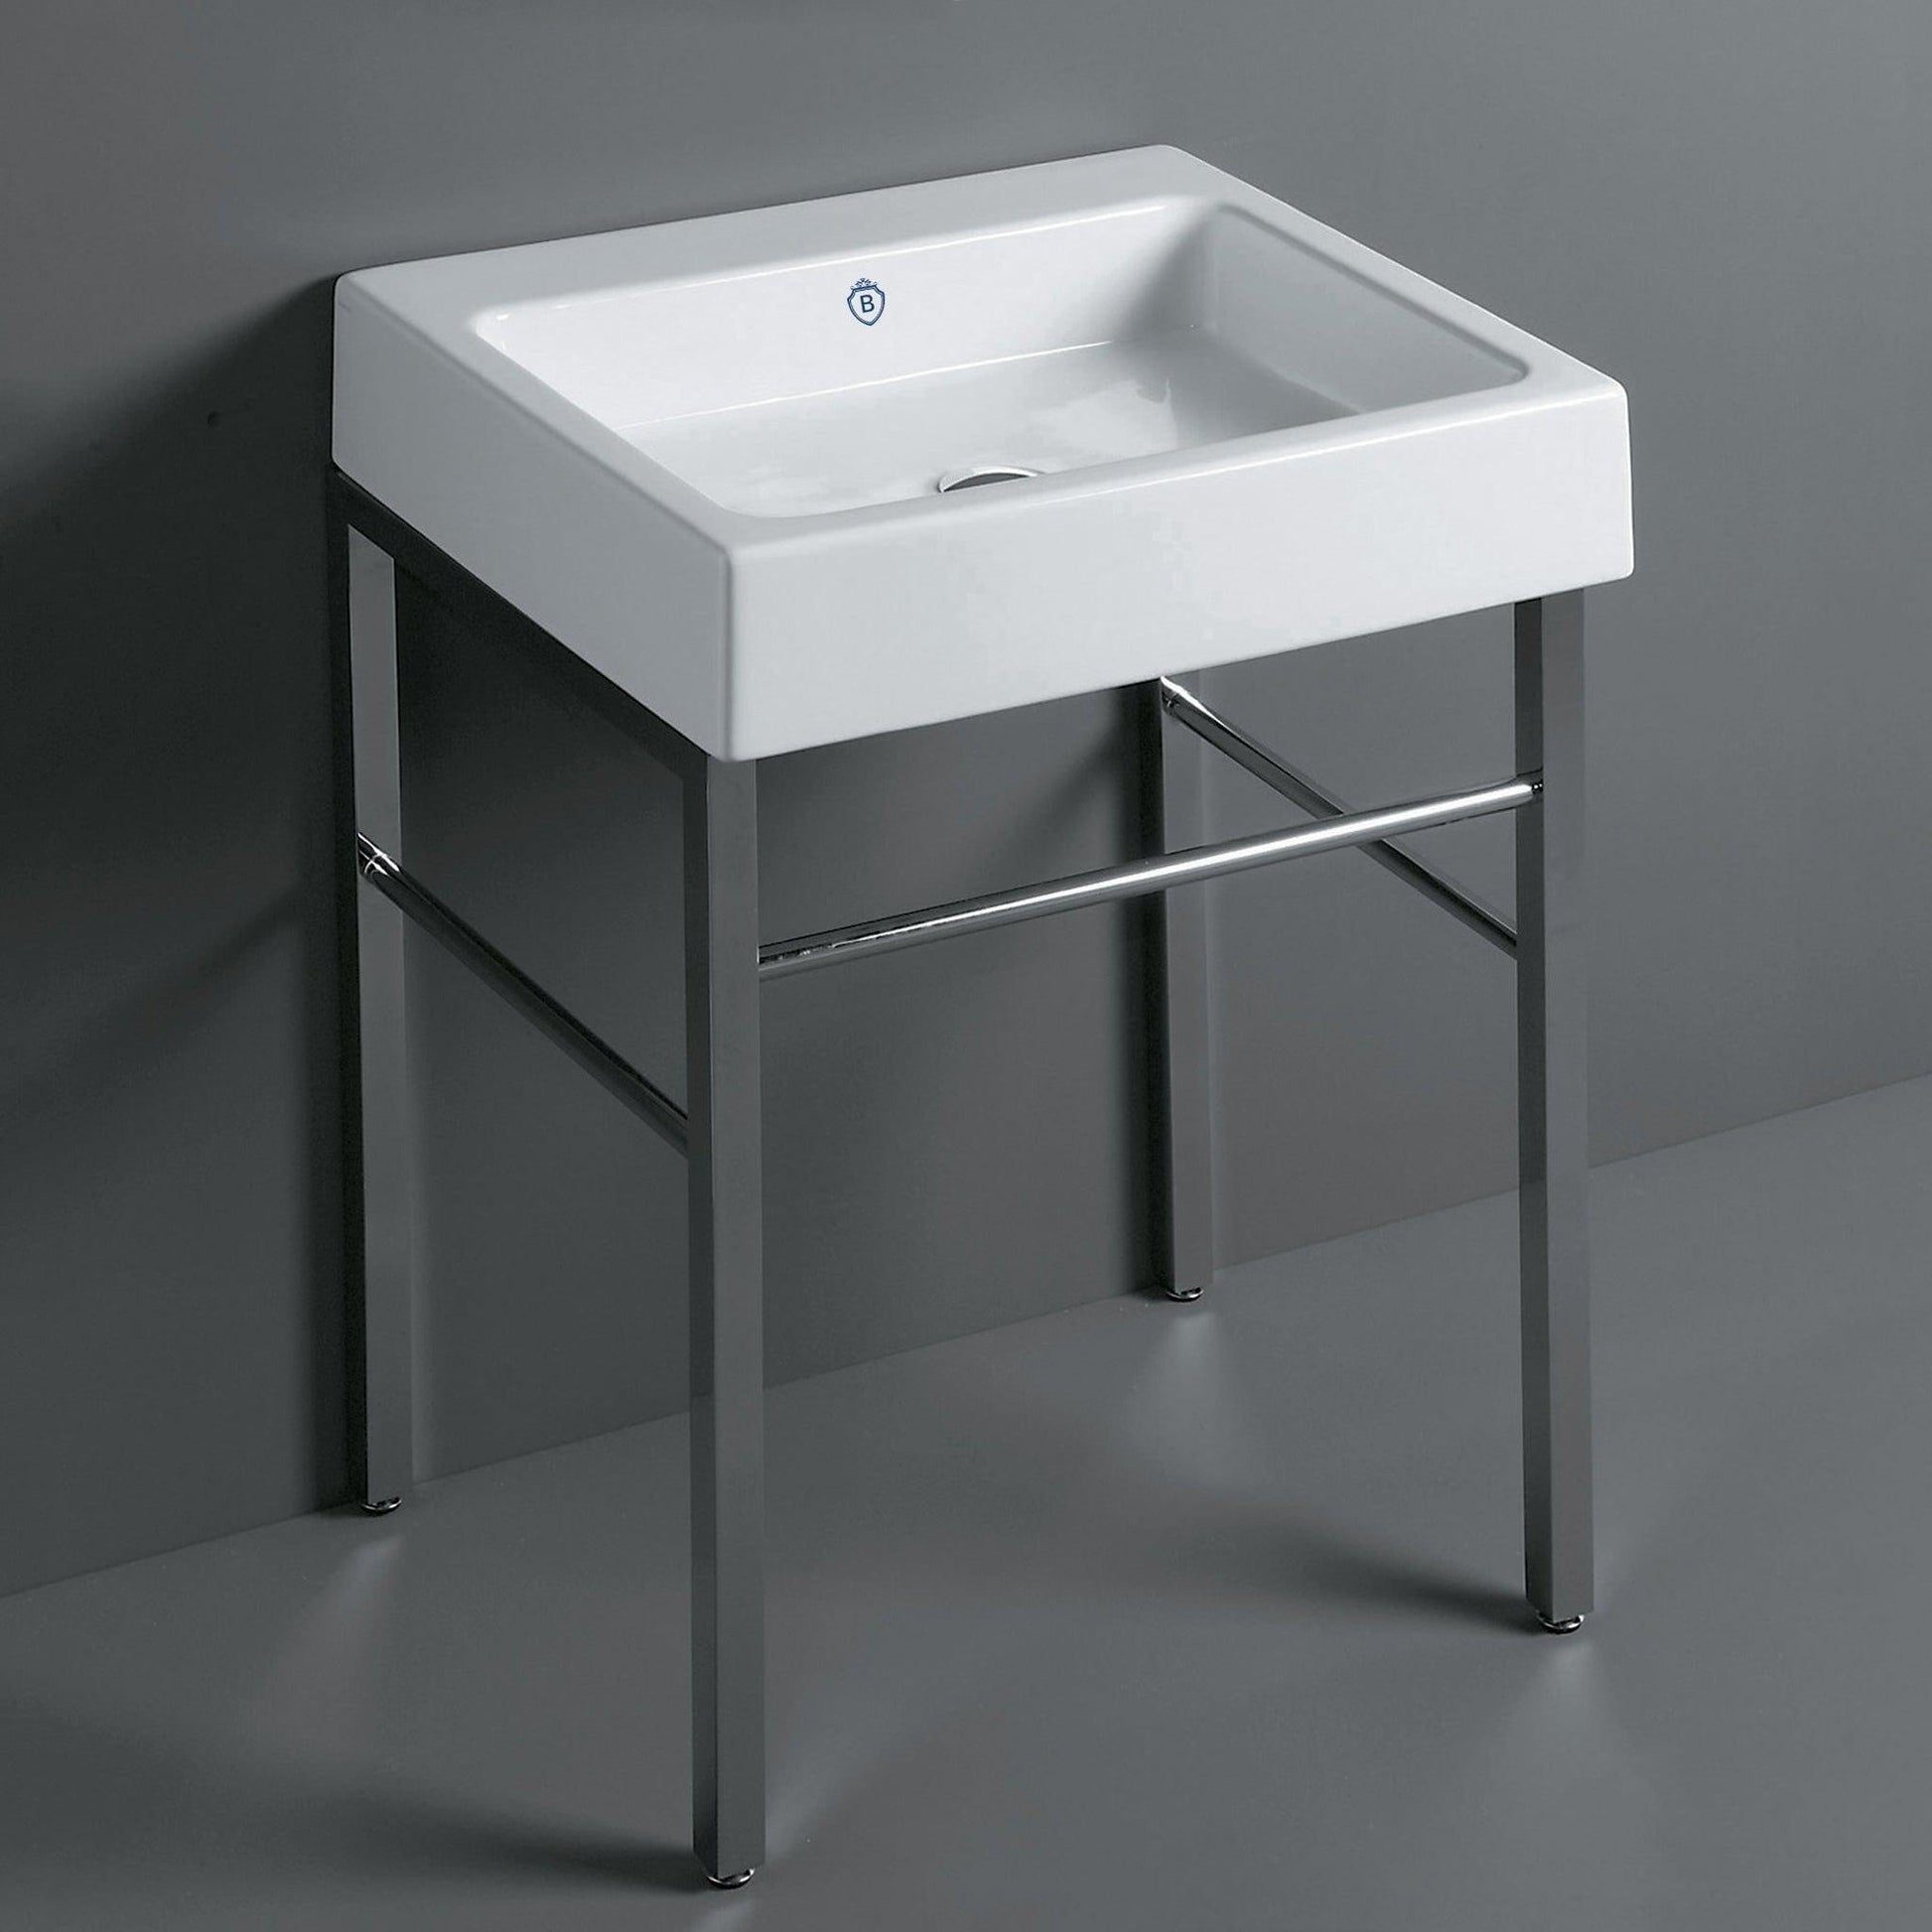 Whitehaus Britannia B-U60-DUCG1-A06 White/Chrome Rectangular Sink Console With Front Towel Bar and No Hole Drill